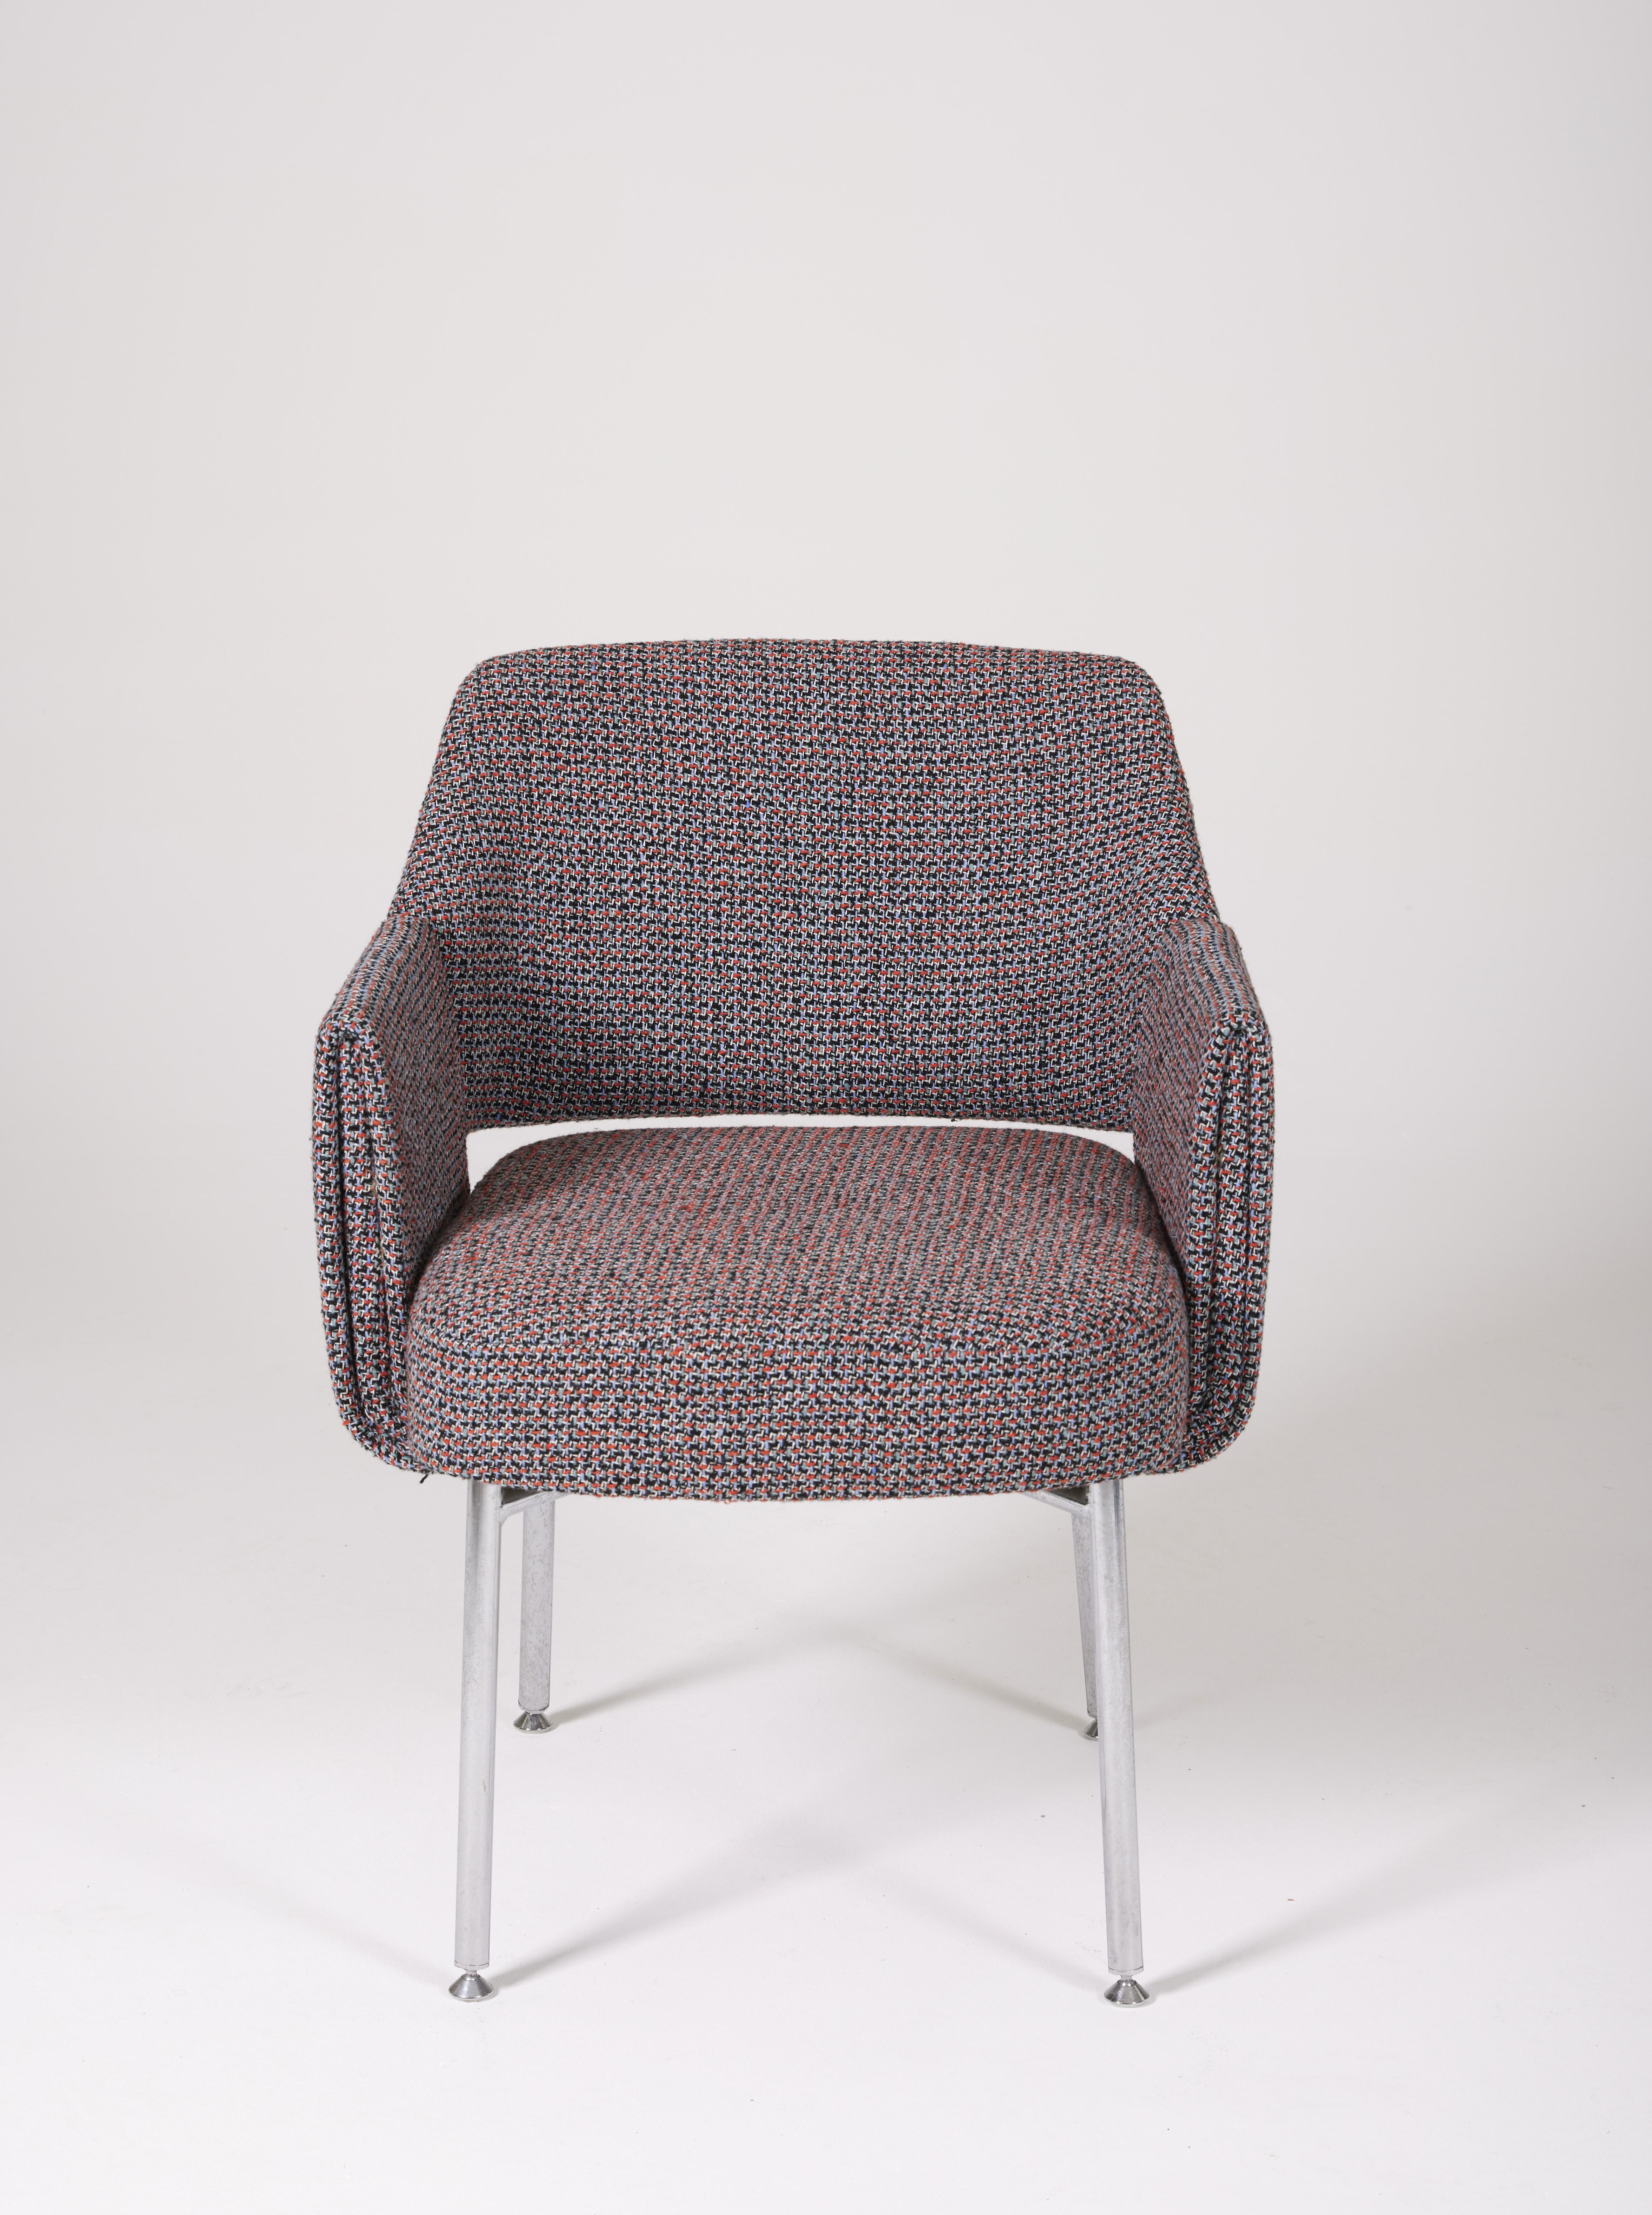 Mid-20th Century Deauville Airborne armchair in tweed For Sale